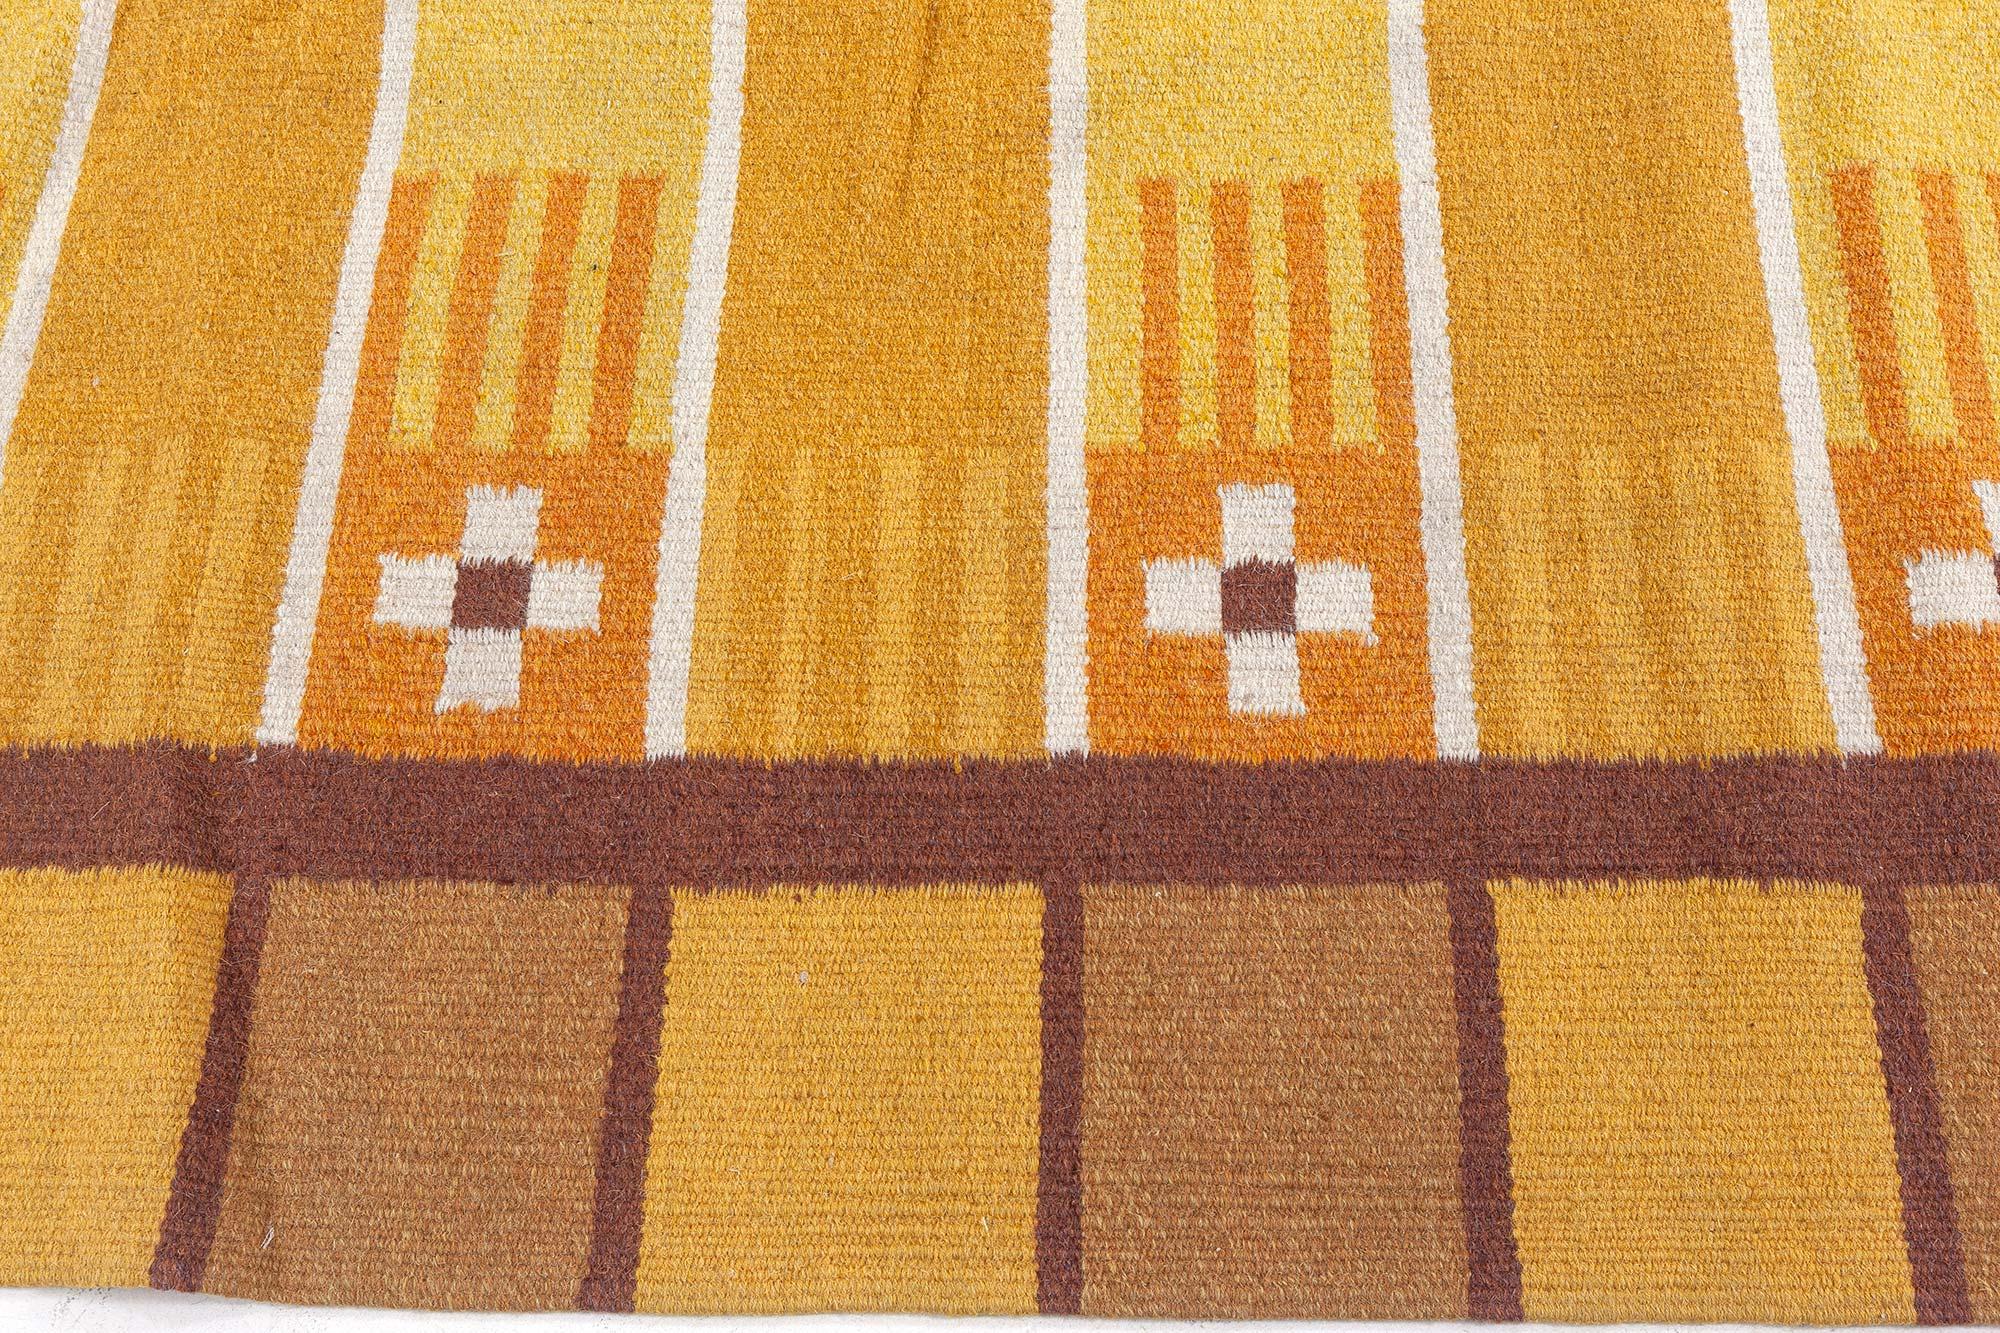 Mid-20th century Swedish yellow, brown and white handwoven wool rug
Size: 5'6